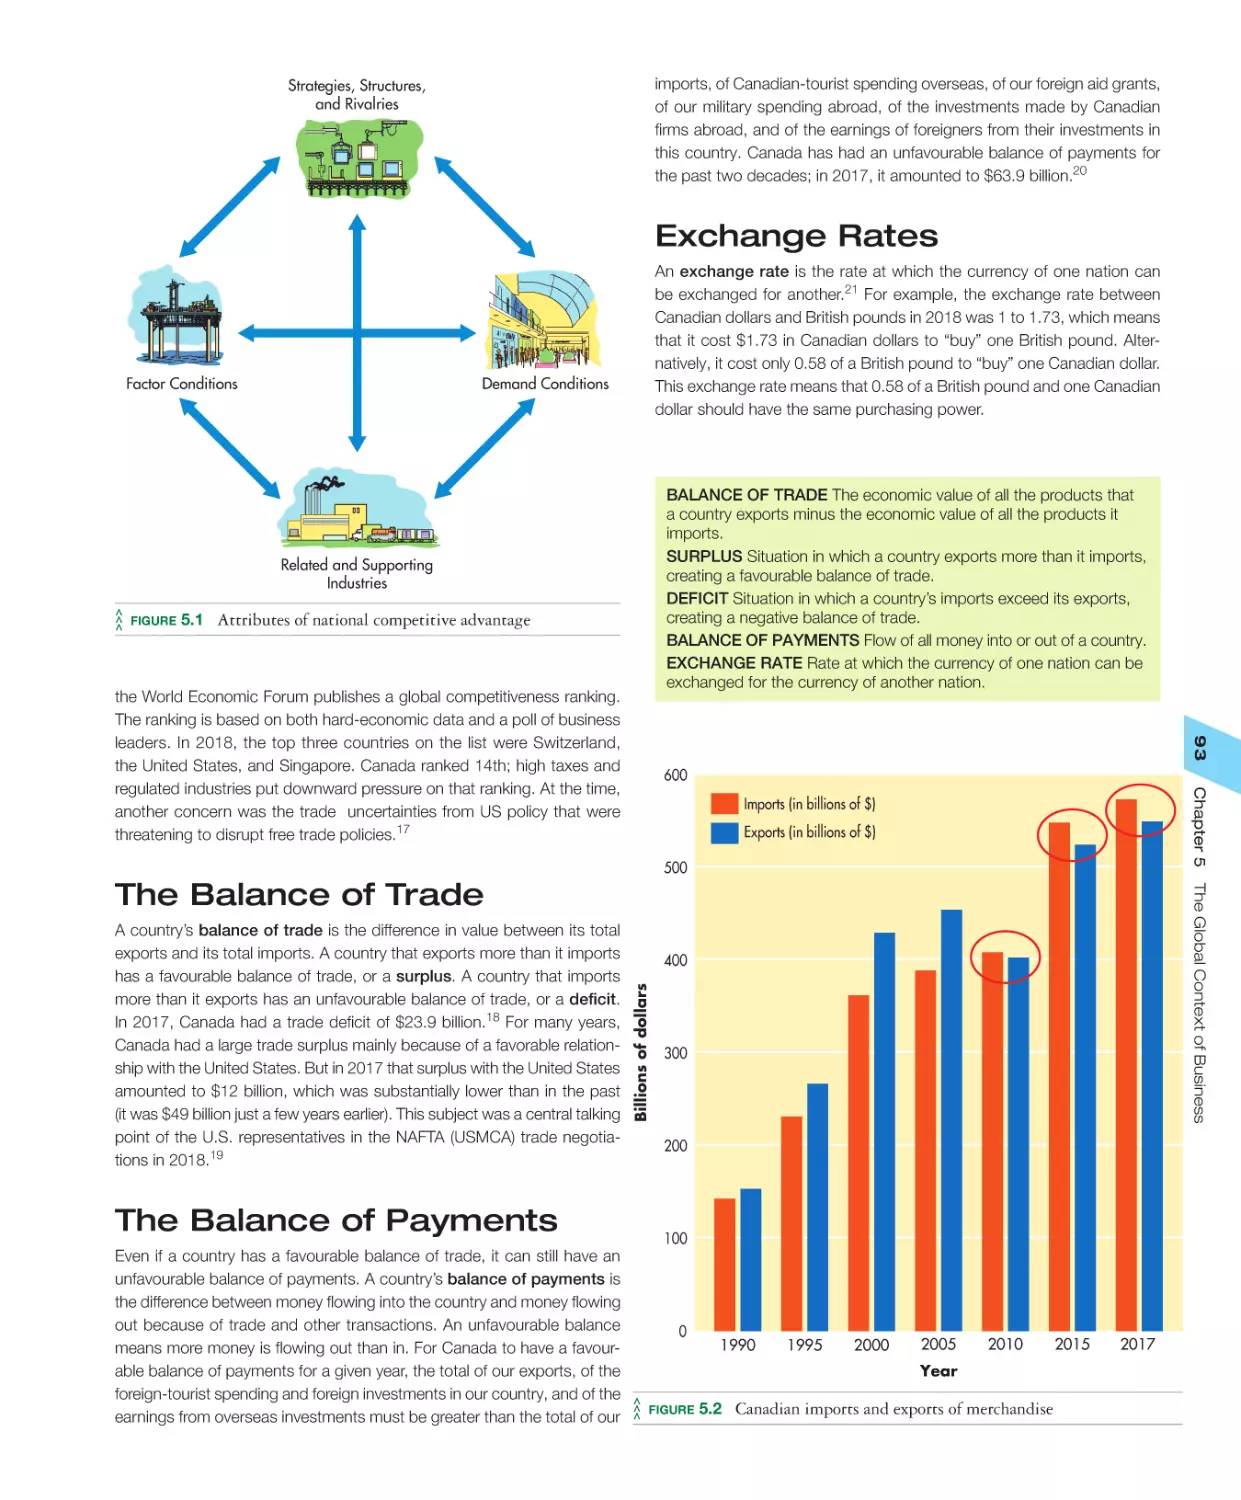 The Balance of Payments
Exchange Rates